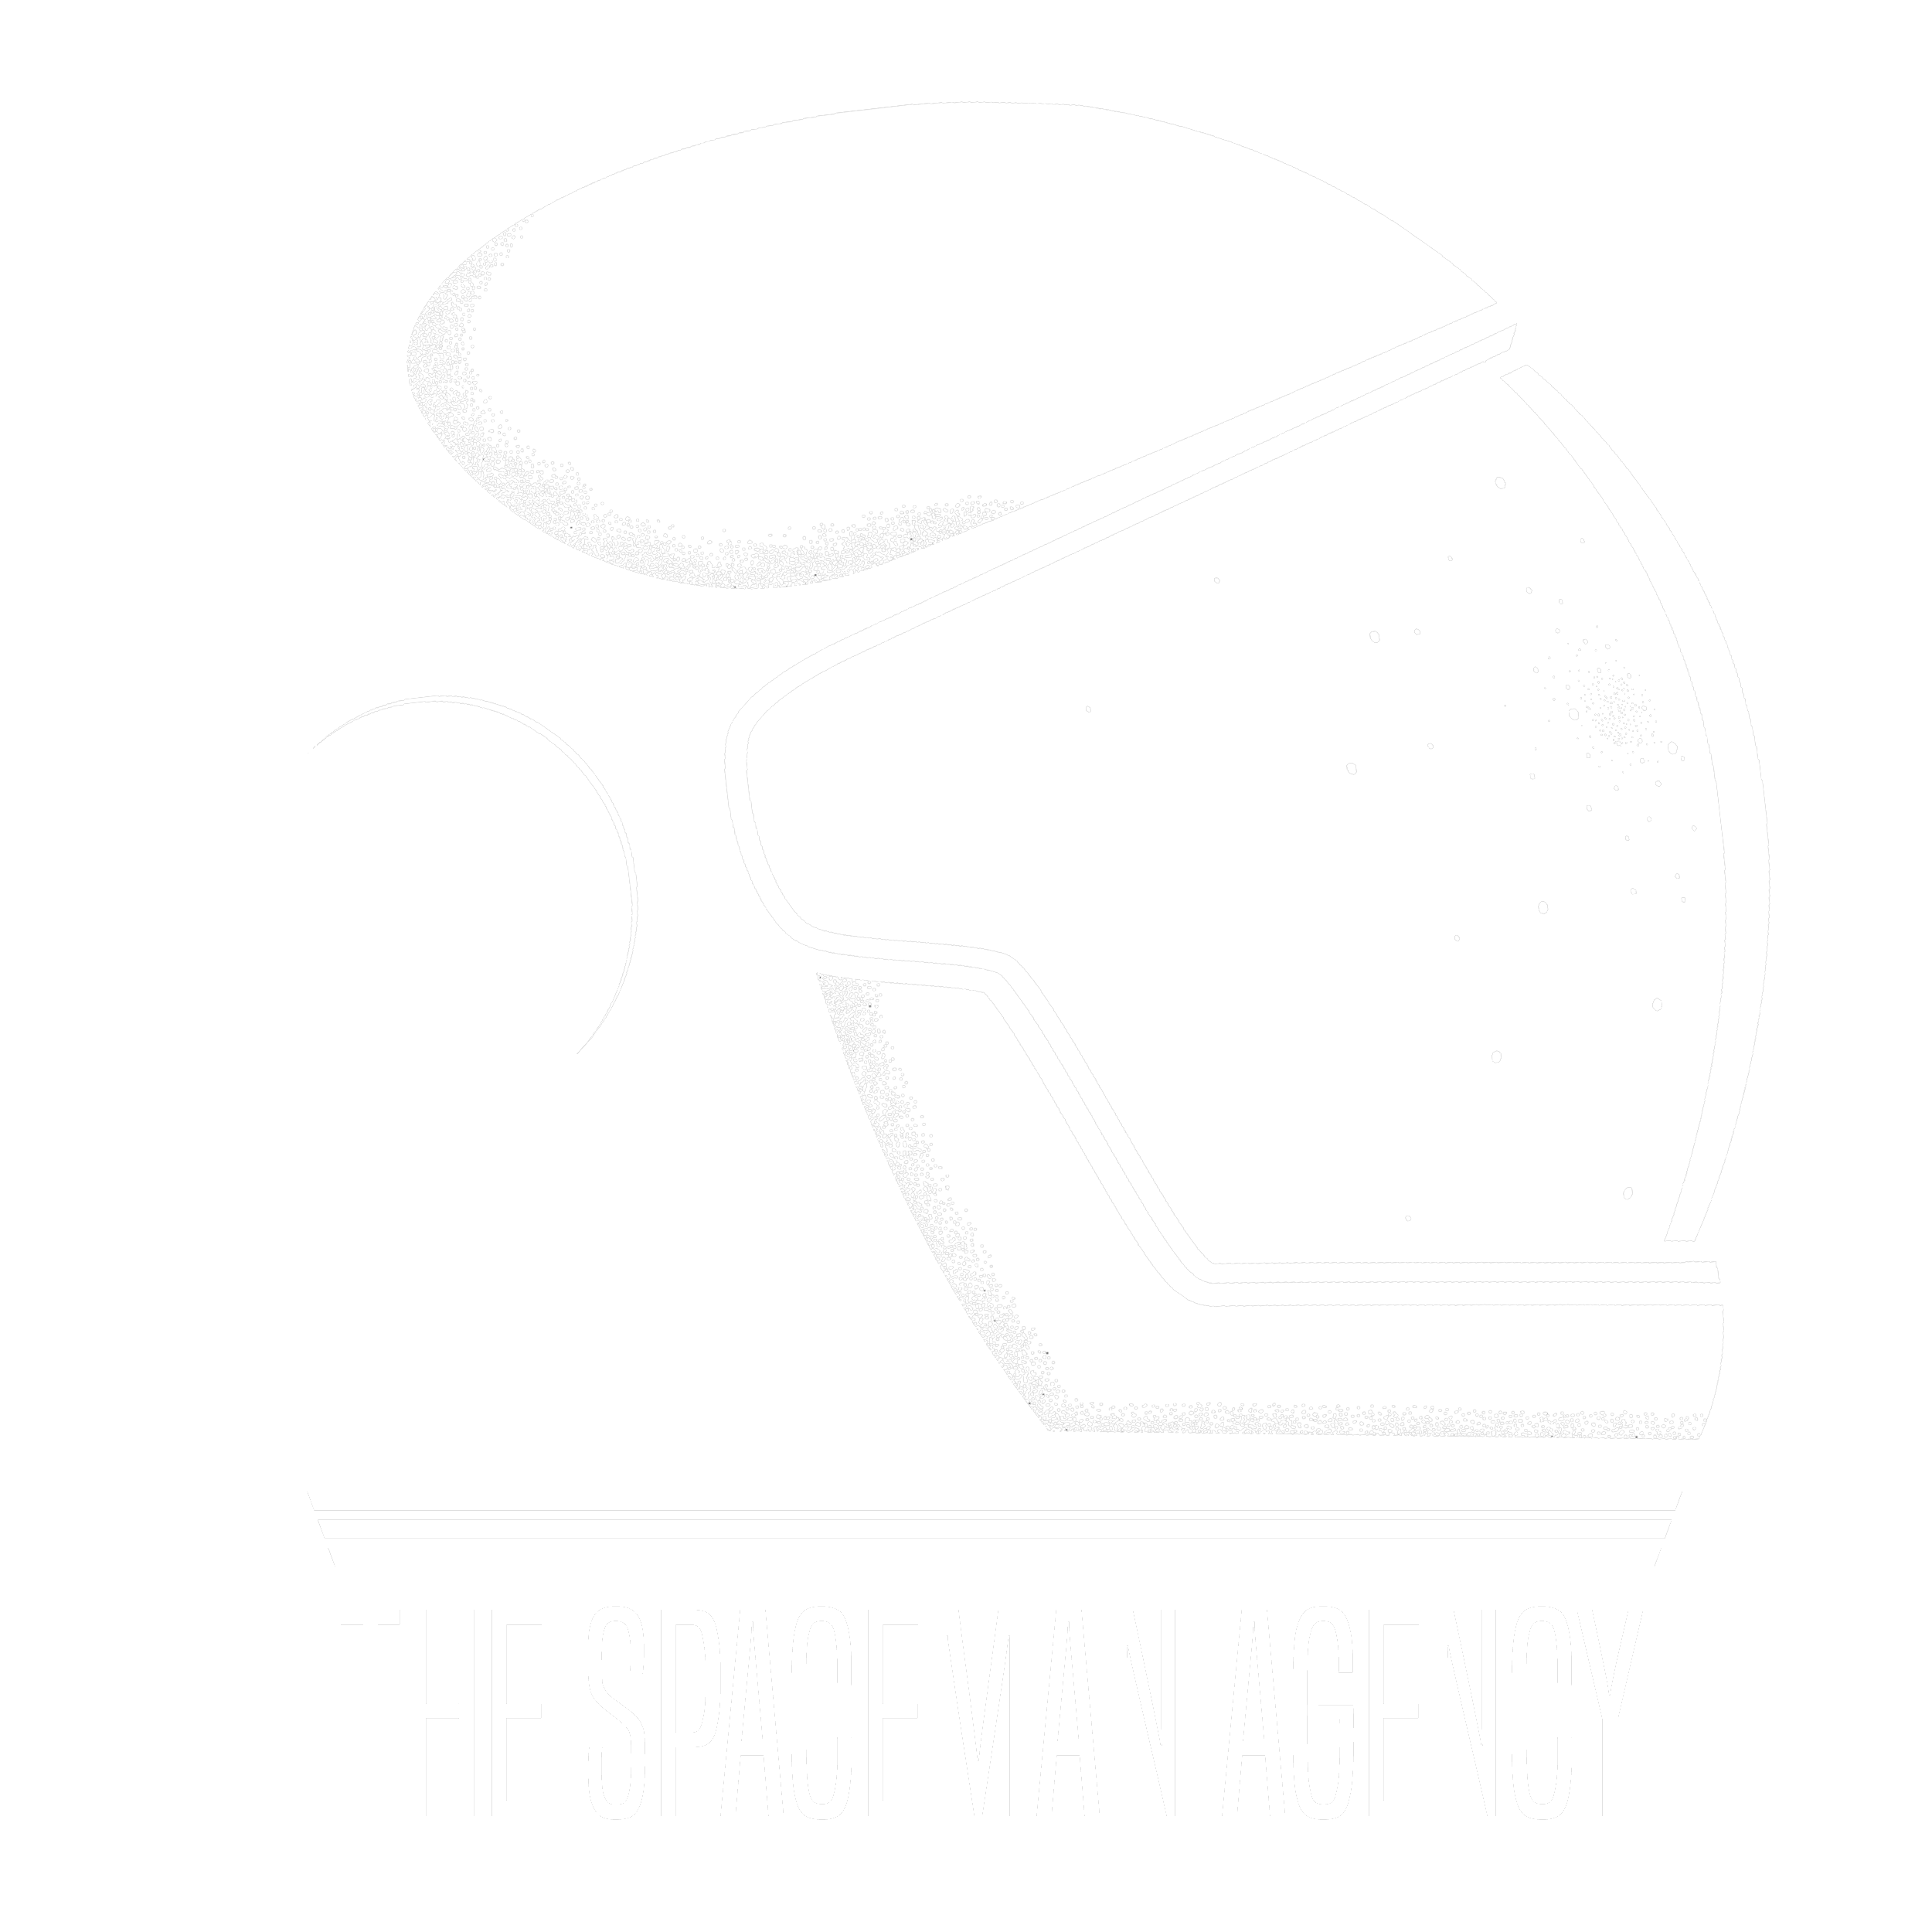 The Spaceman Agency